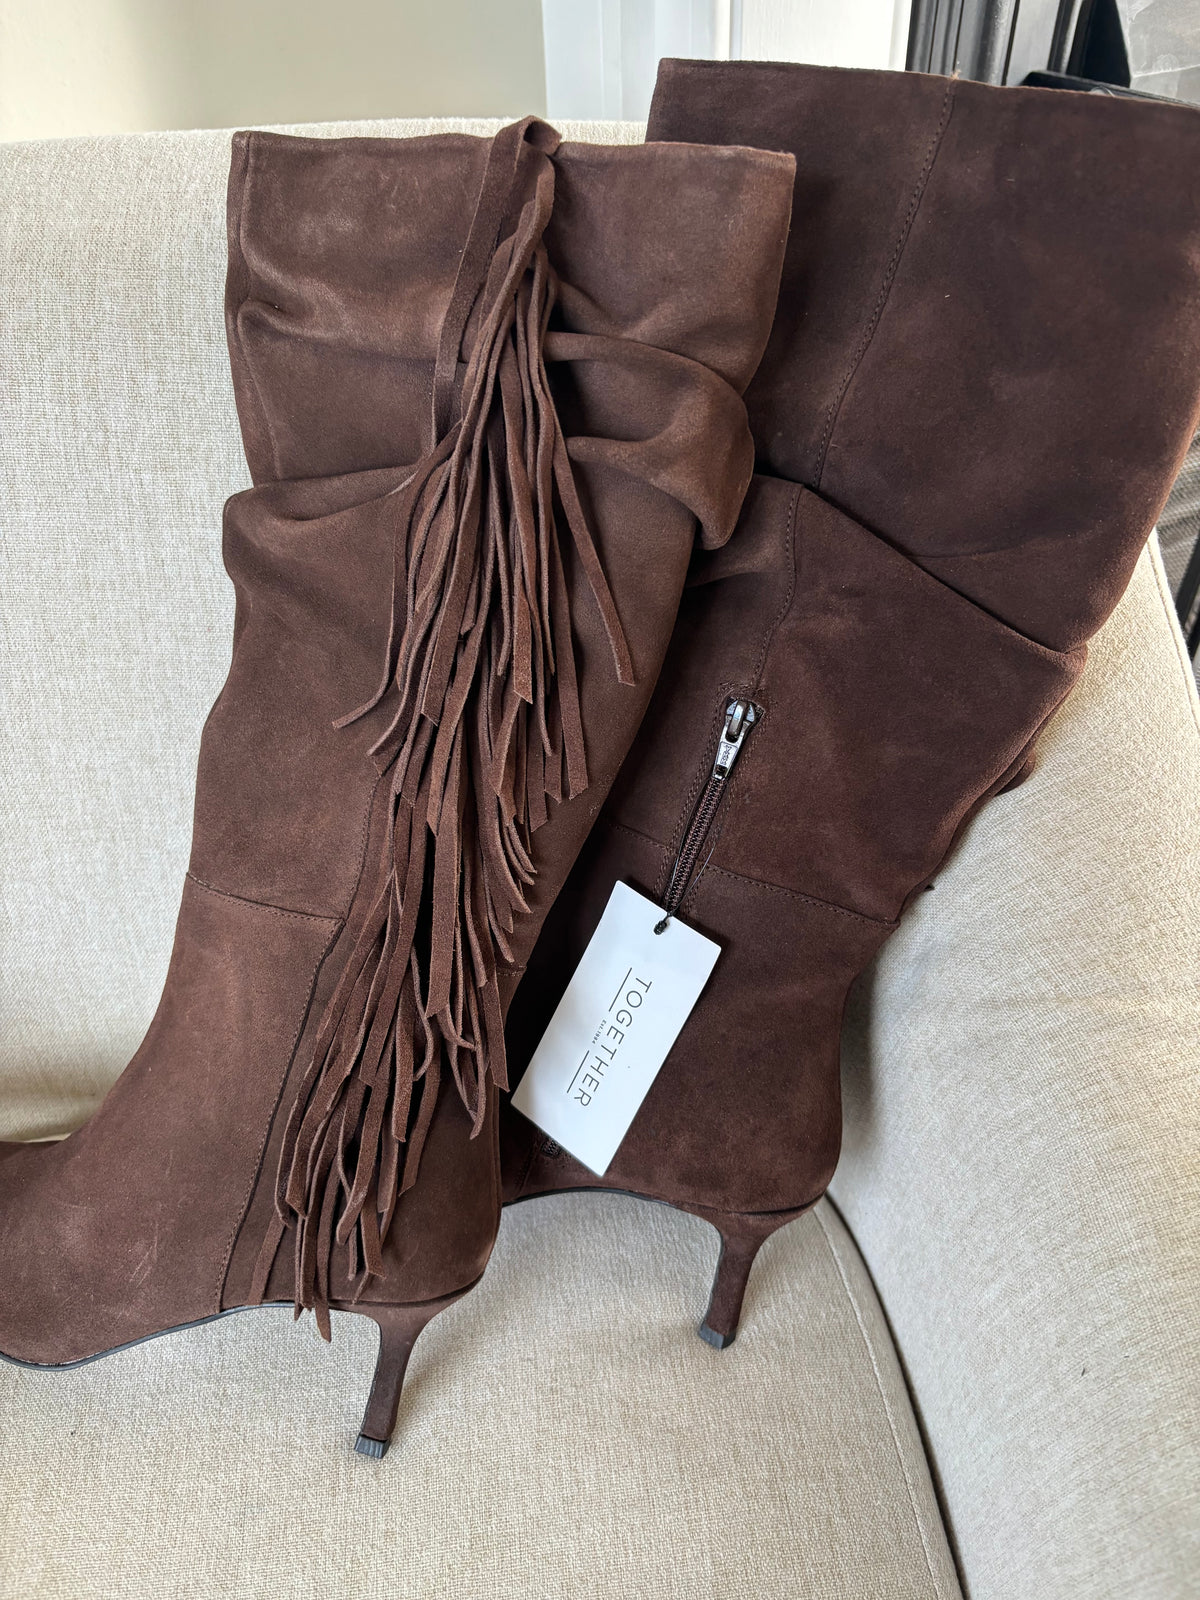 Chocolate Fringe Trim Suede Knee Boots by Together Size 7